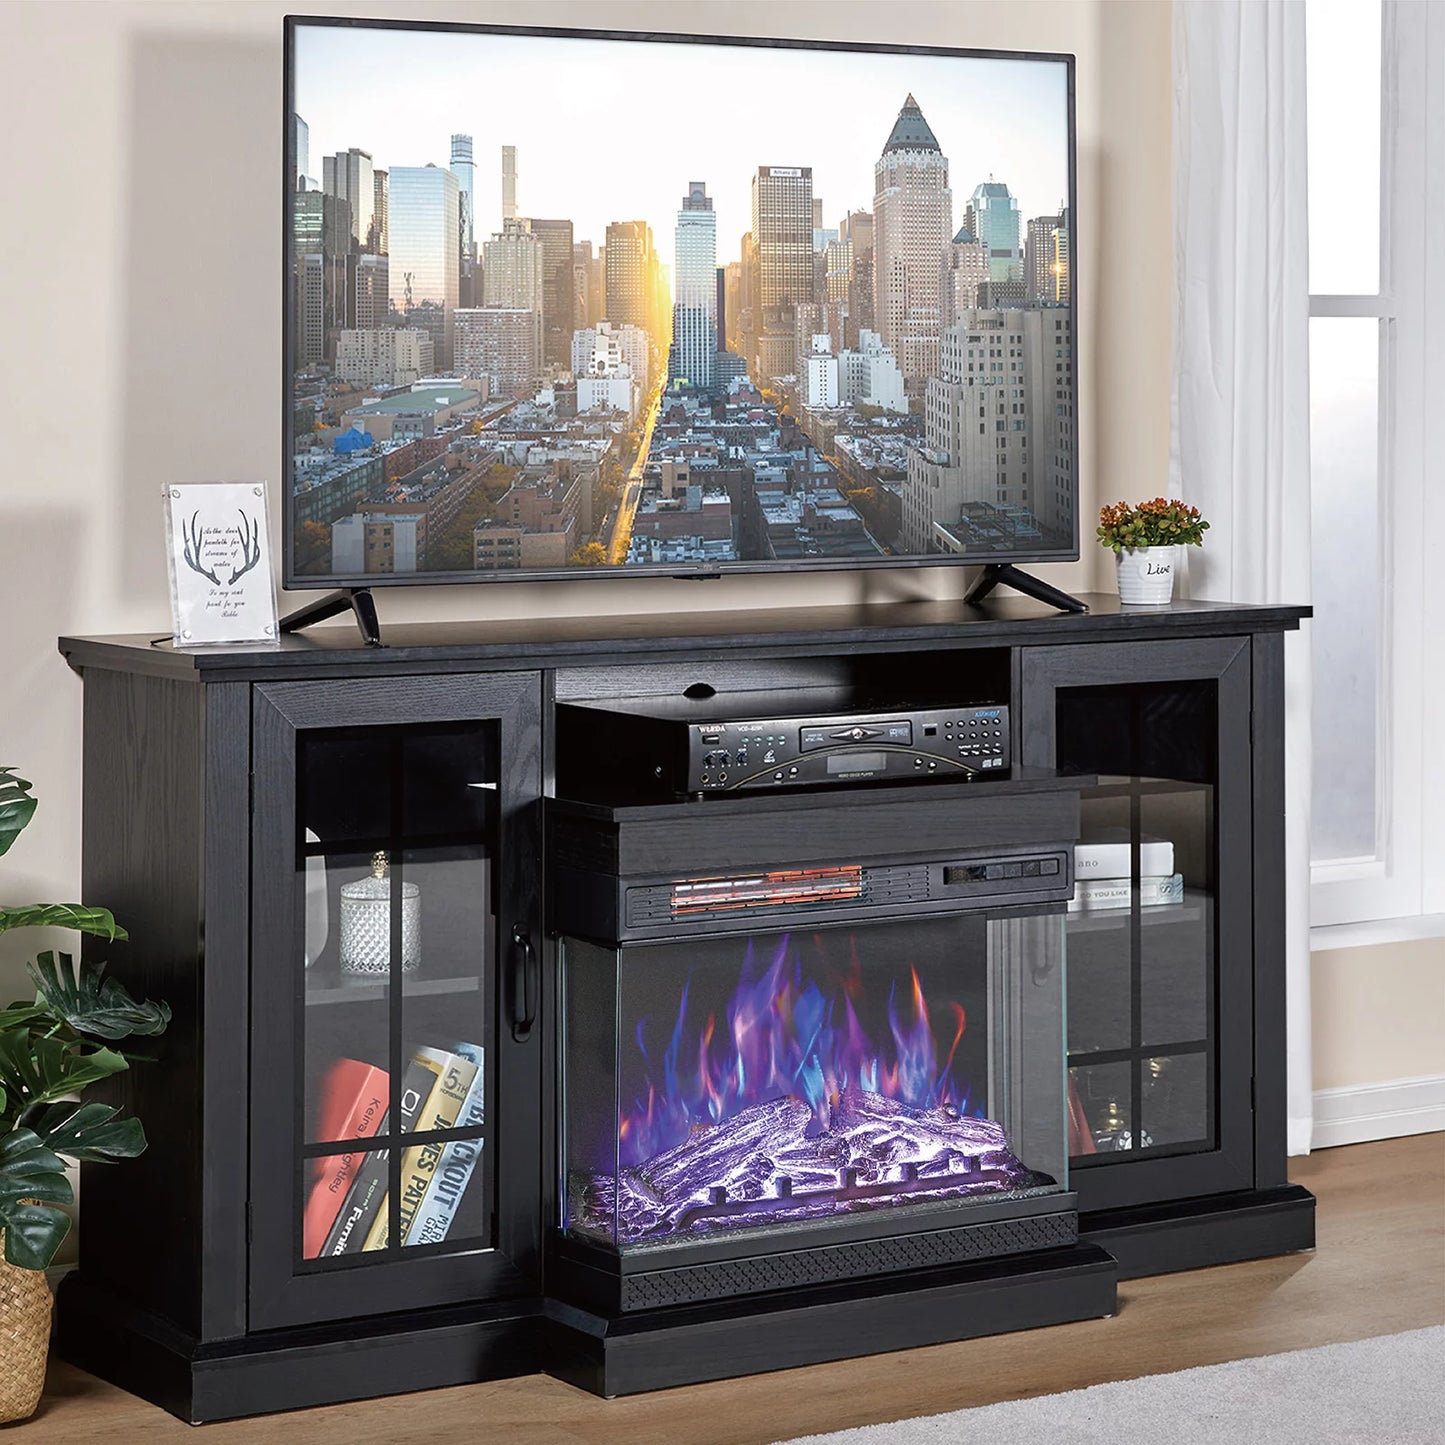 AMERLIFE 3-Sided Glass Fireplace TV Stand Console Table with 59'' Fireplace, Rustic Media Entertainment Center for TVs up to 65'' Door Closed Storage, Black